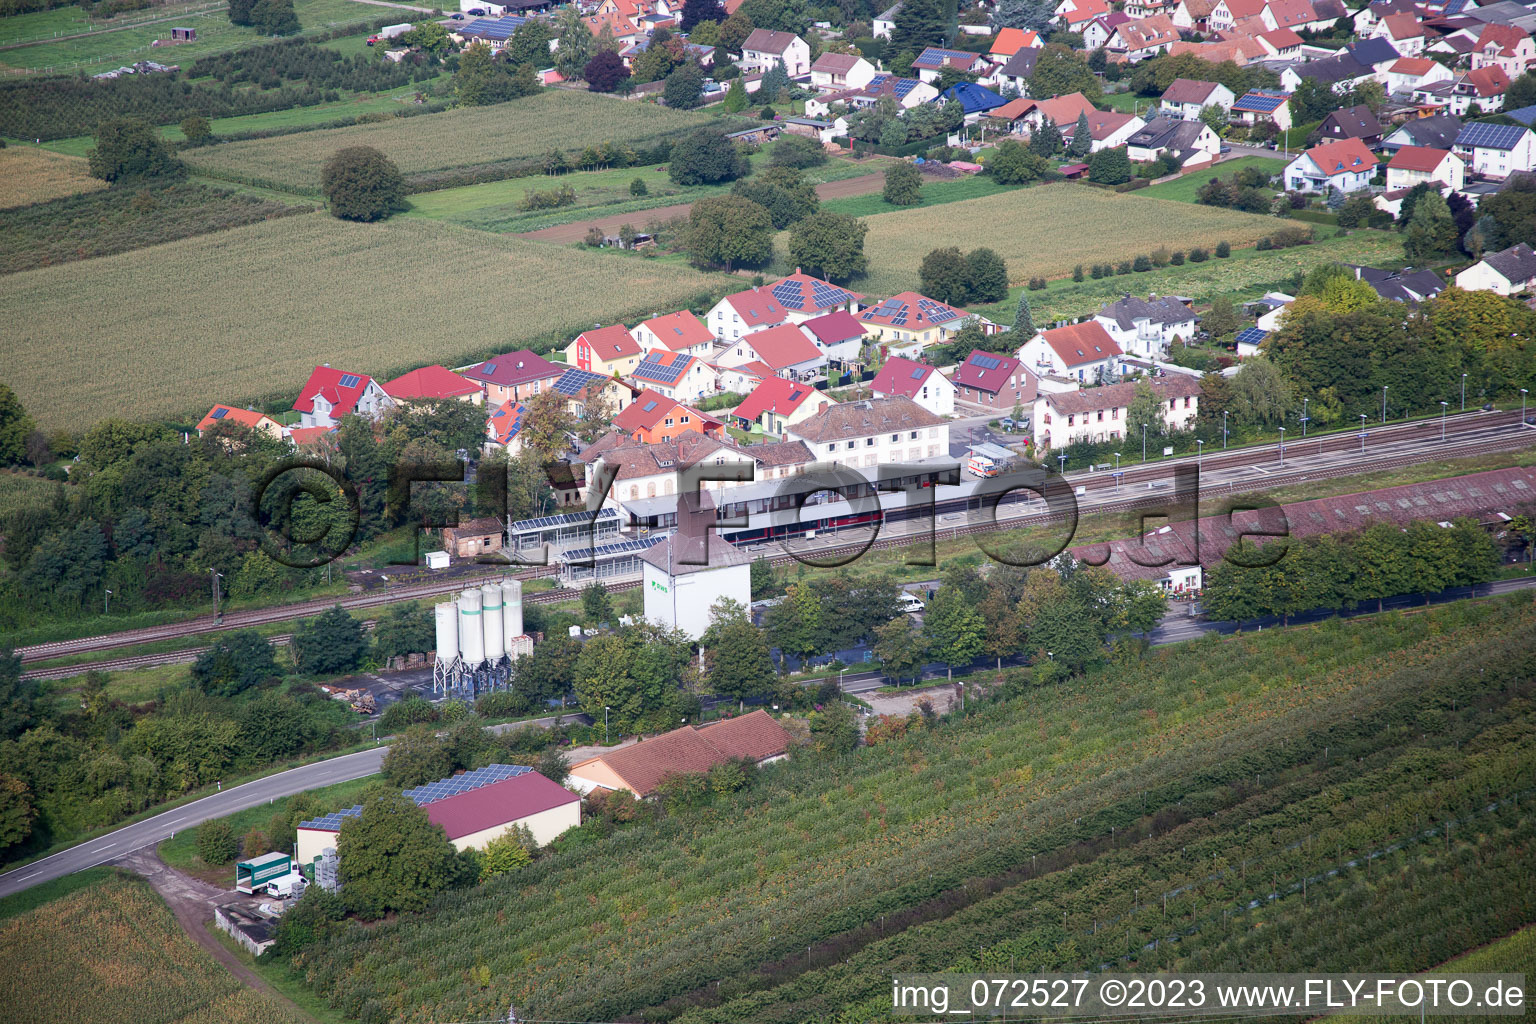 Aerial photograpy of Railroad station in Winden in the state Rhineland-Palatinate, Germany